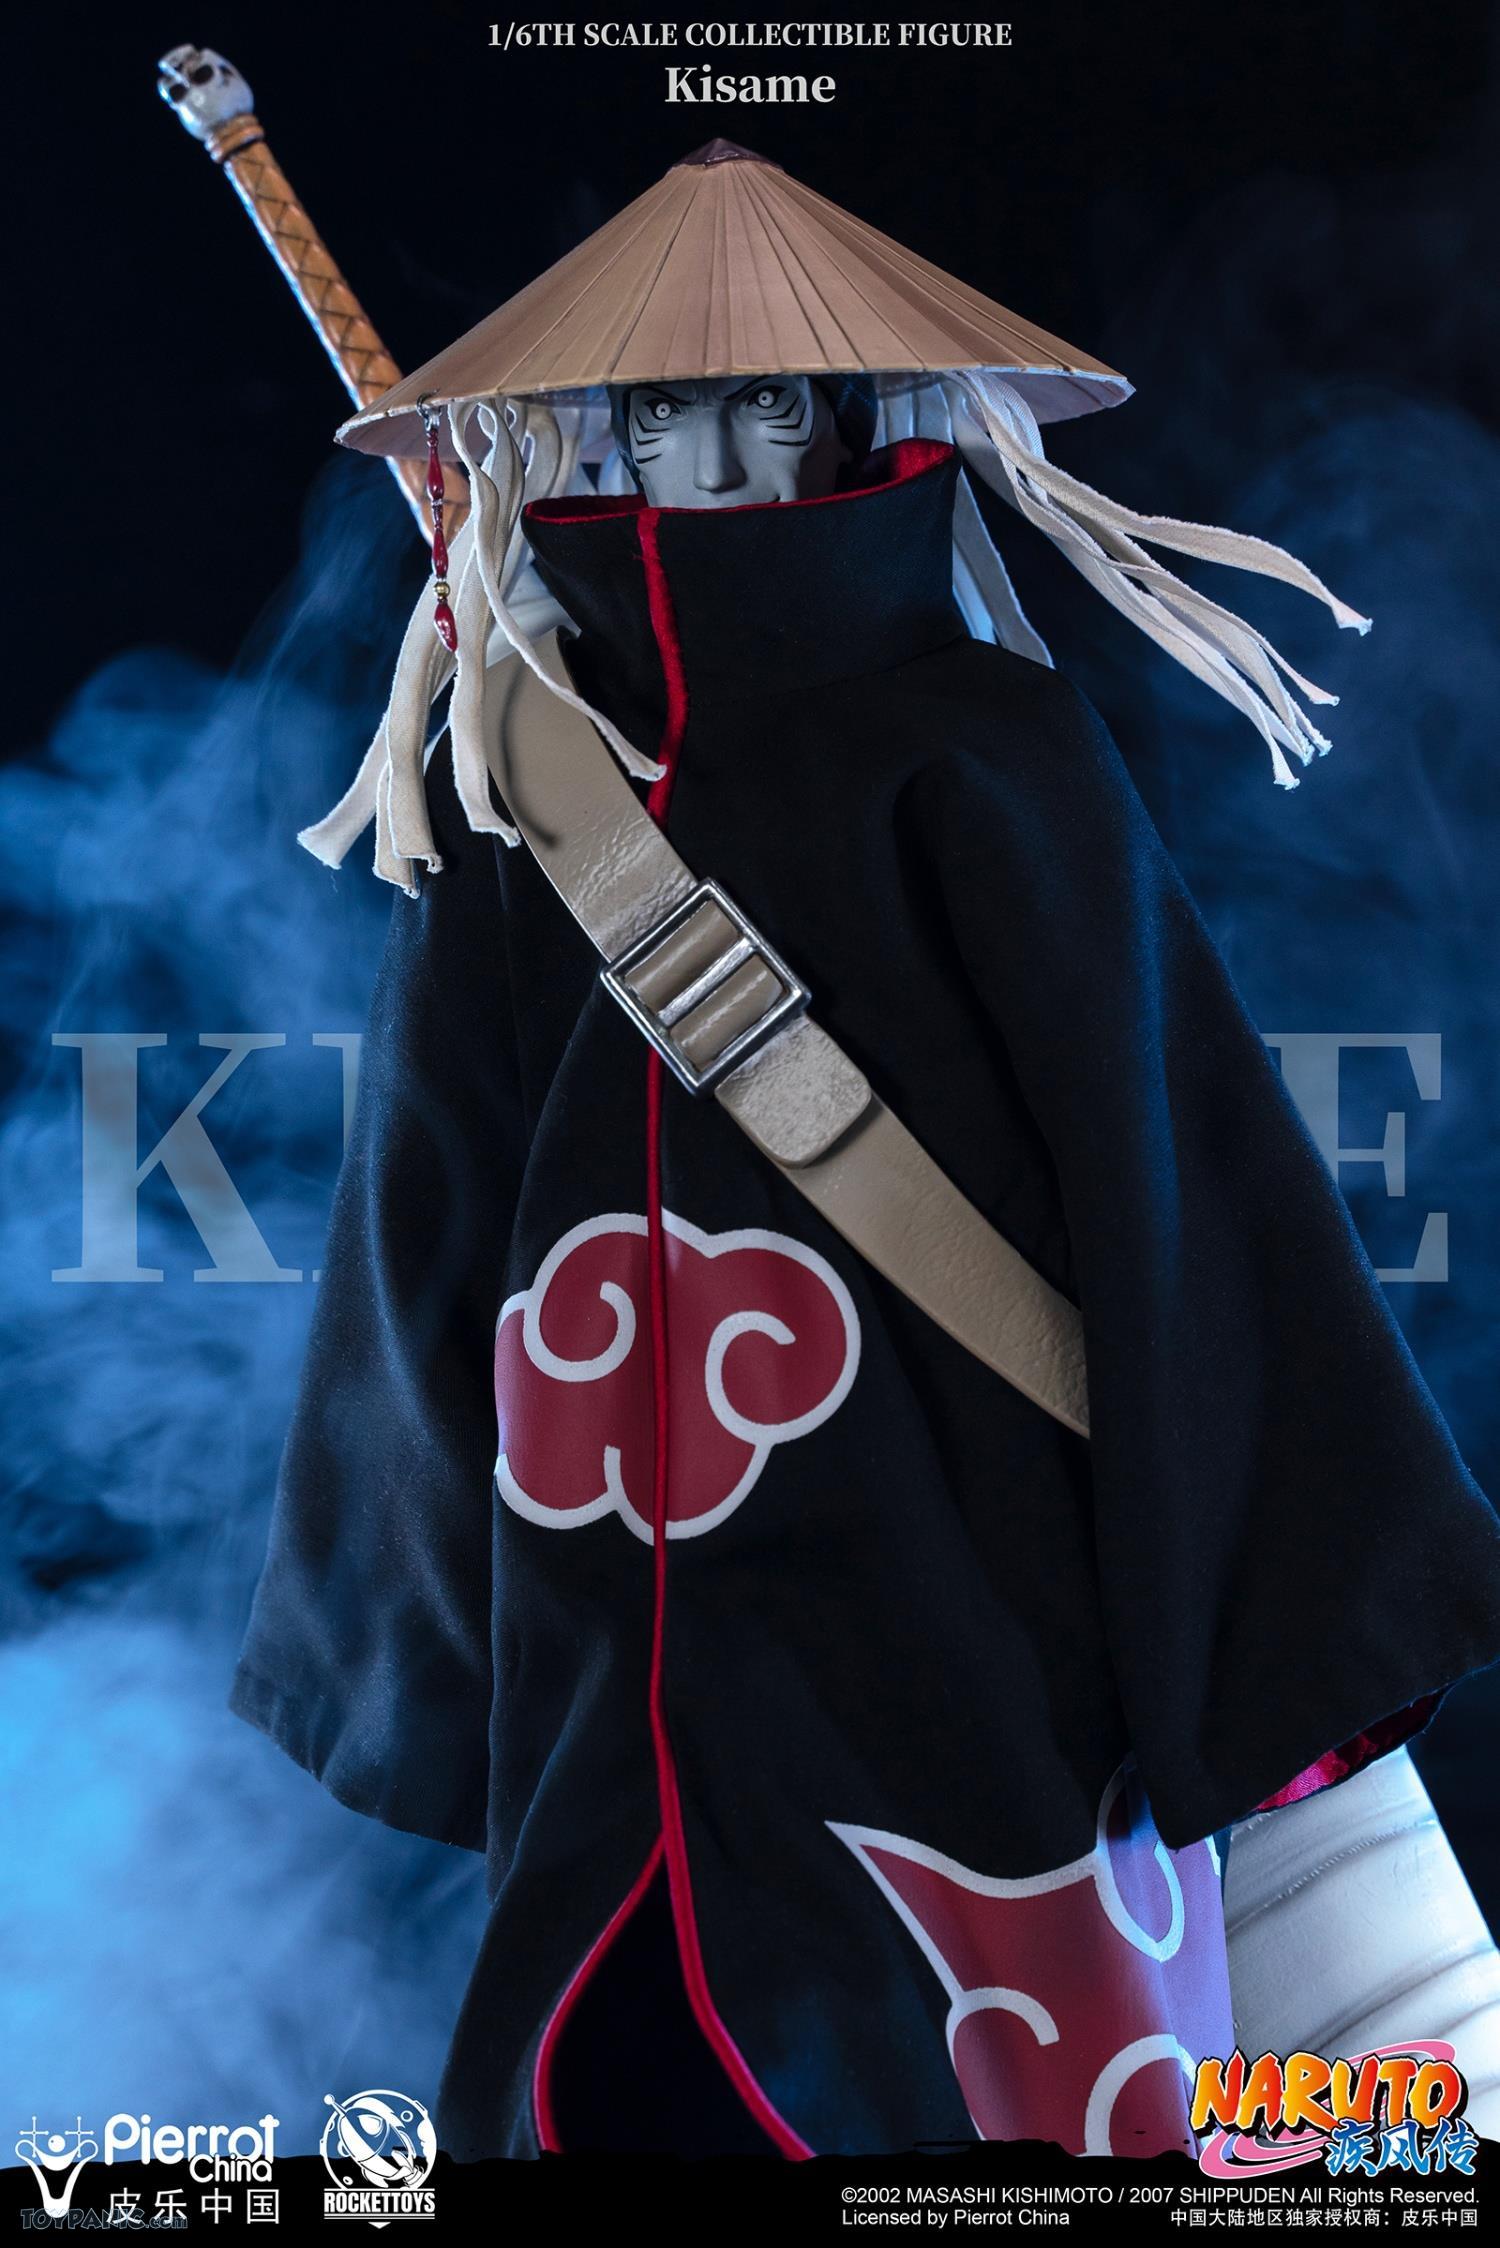 Male - NEW PRODUCT: Rocket Toys ROC-007 1/6 Scale Kisame 221202460439PM_517257